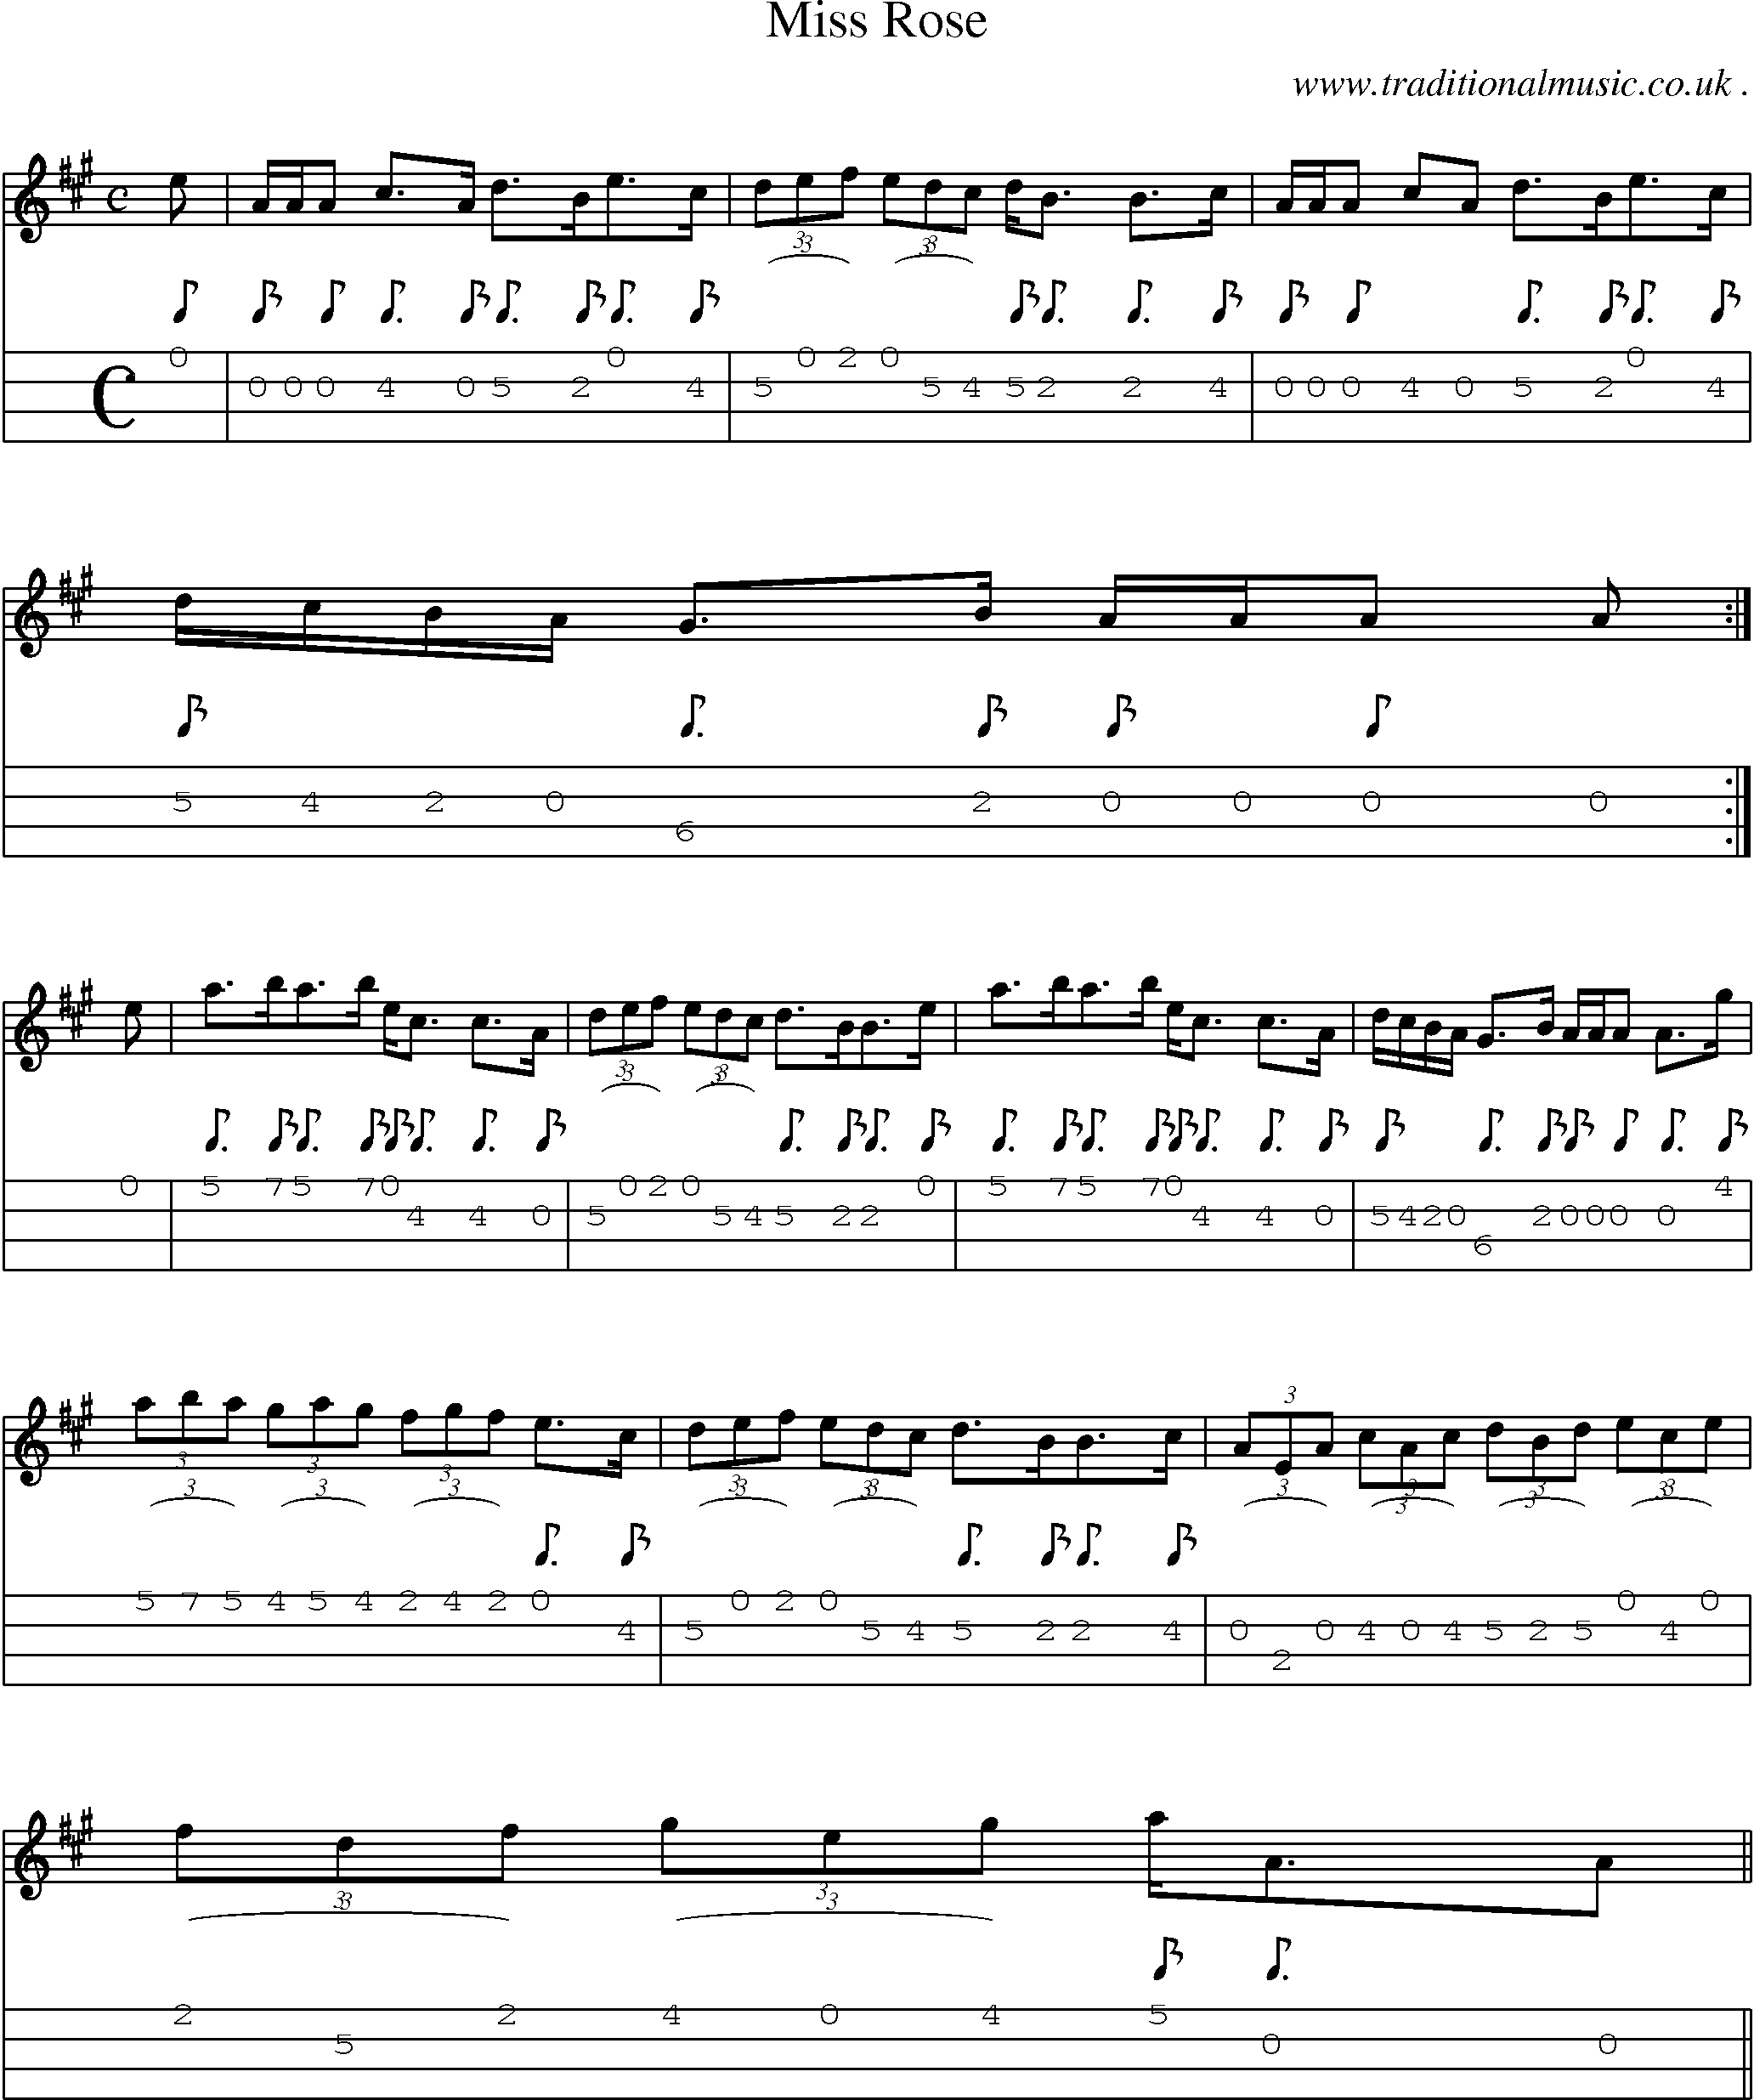 Sheet-music  score, Chords and Mandolin Tabs for Miss Rose